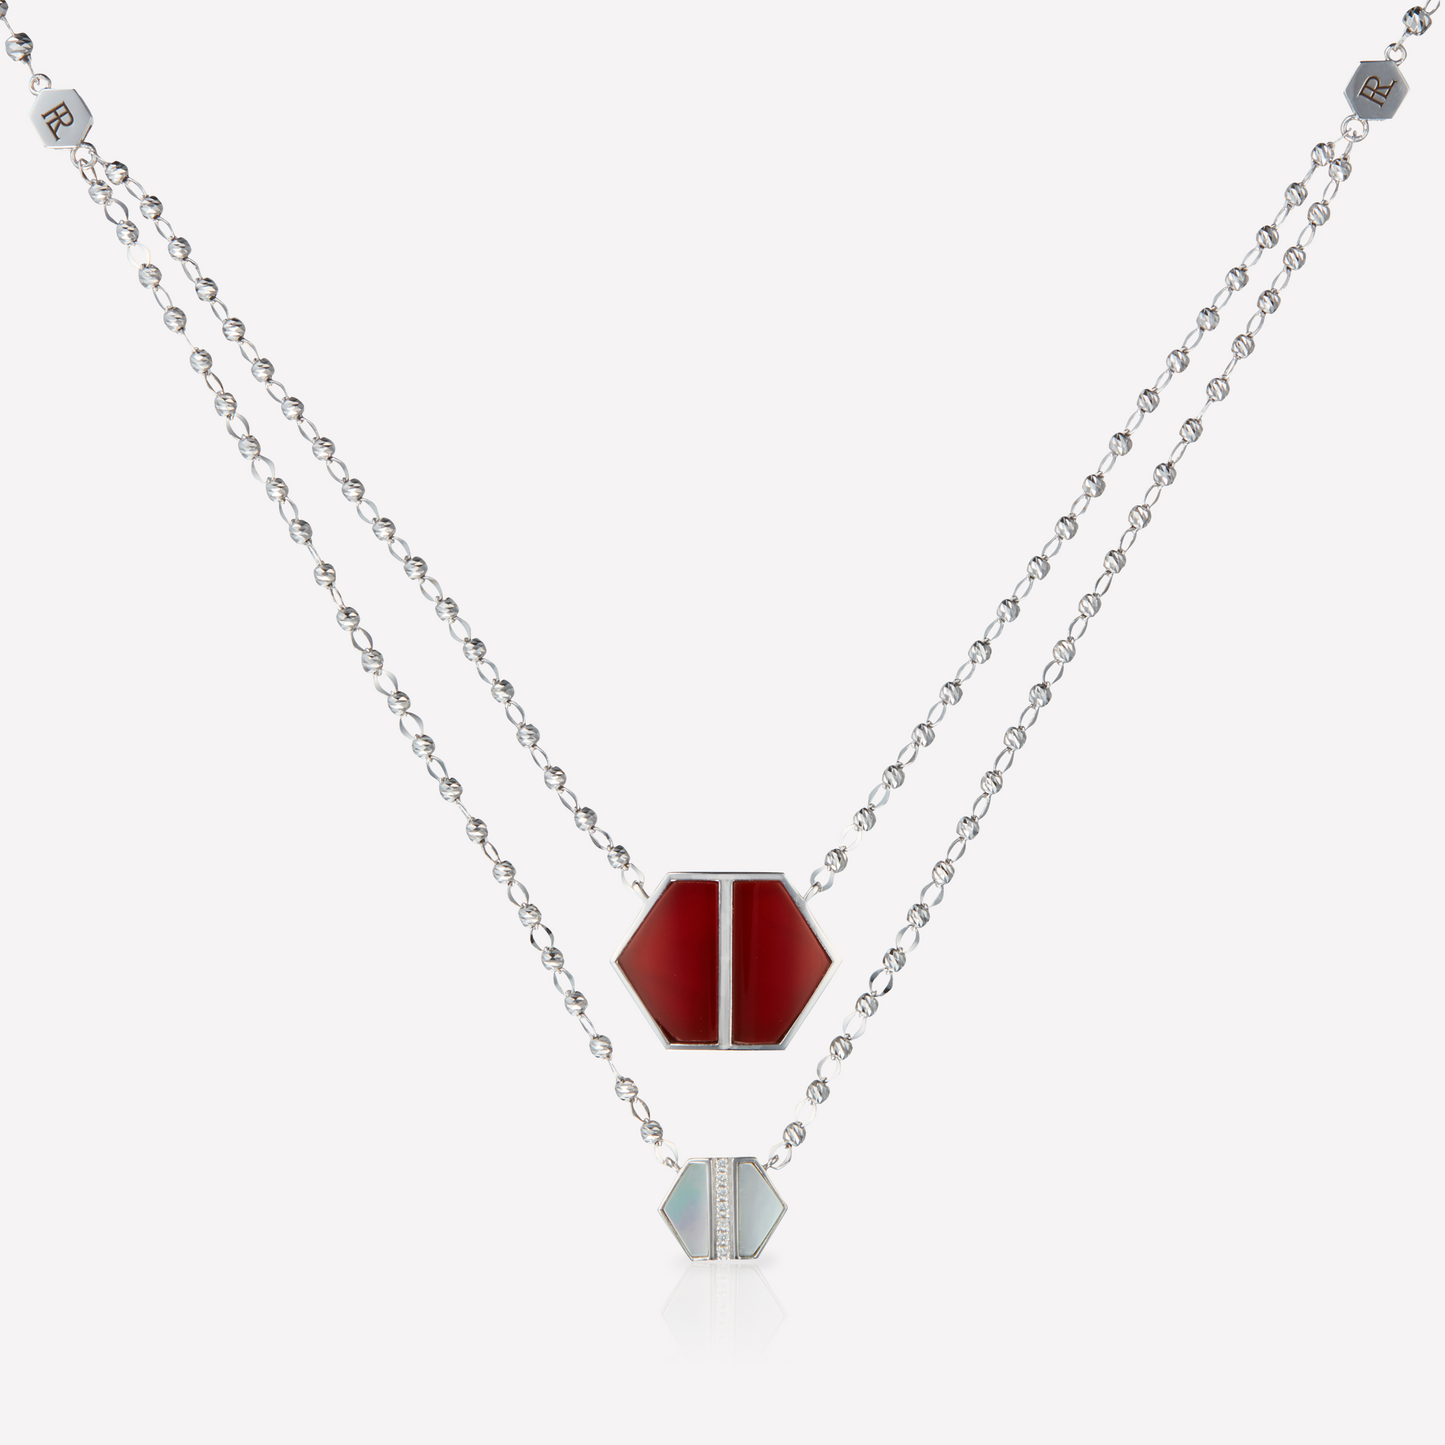 VOID Filled By You Necklace, Large, Carnelian, Diamond S